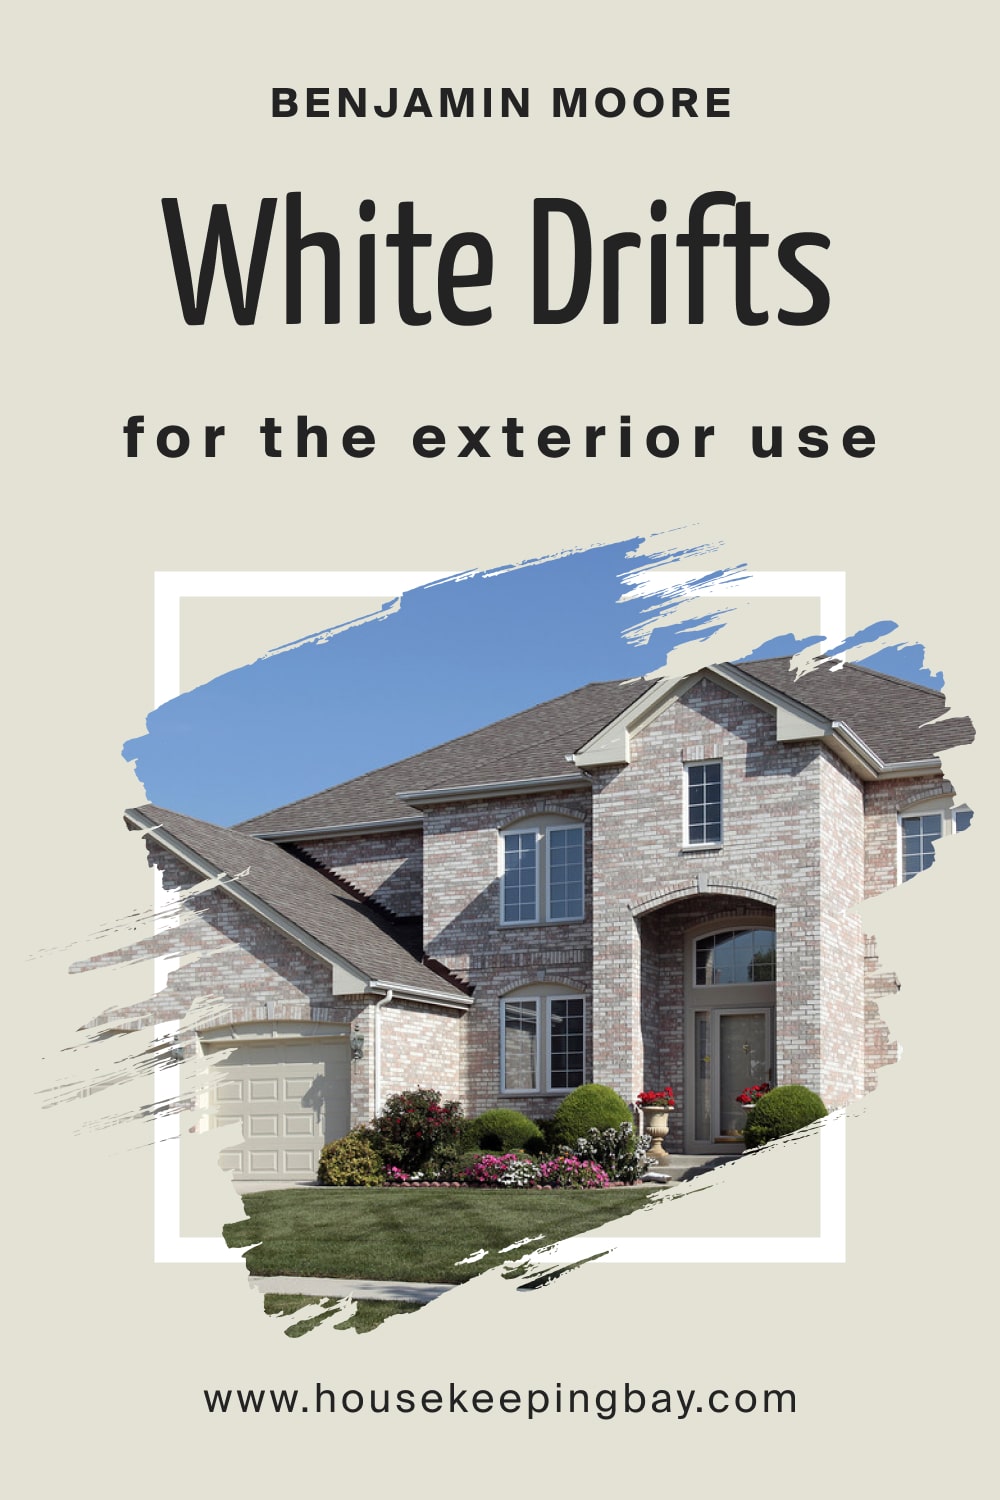 Benjamin Moore. White Drifts OC 138 for the Exterior Use